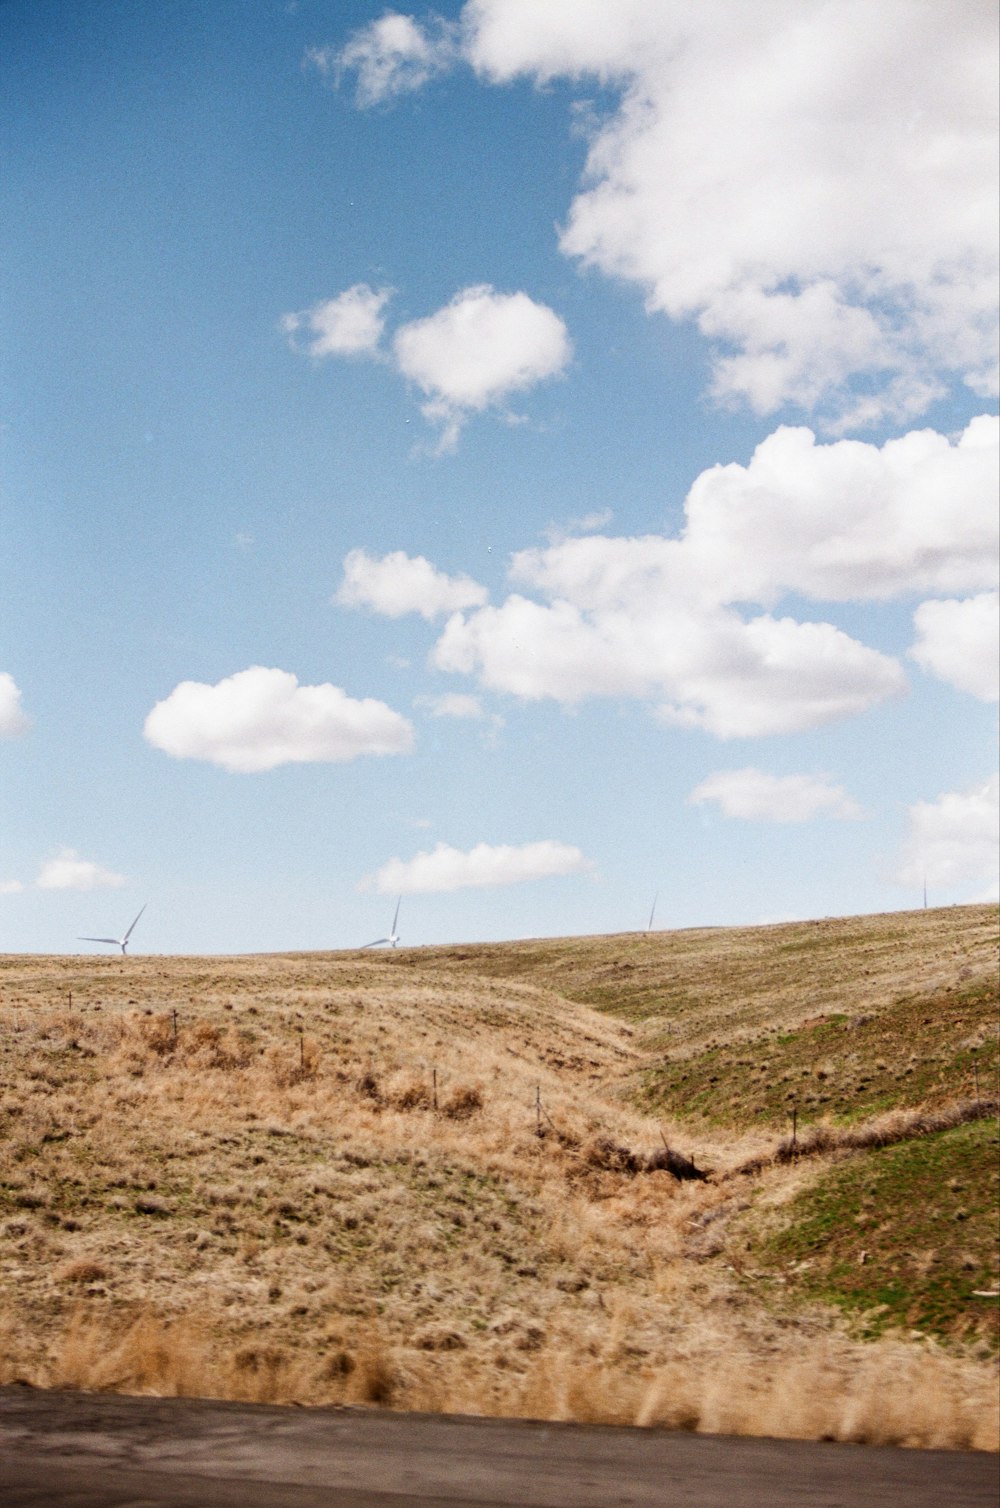 a grassy field with a wind turbine in the distance